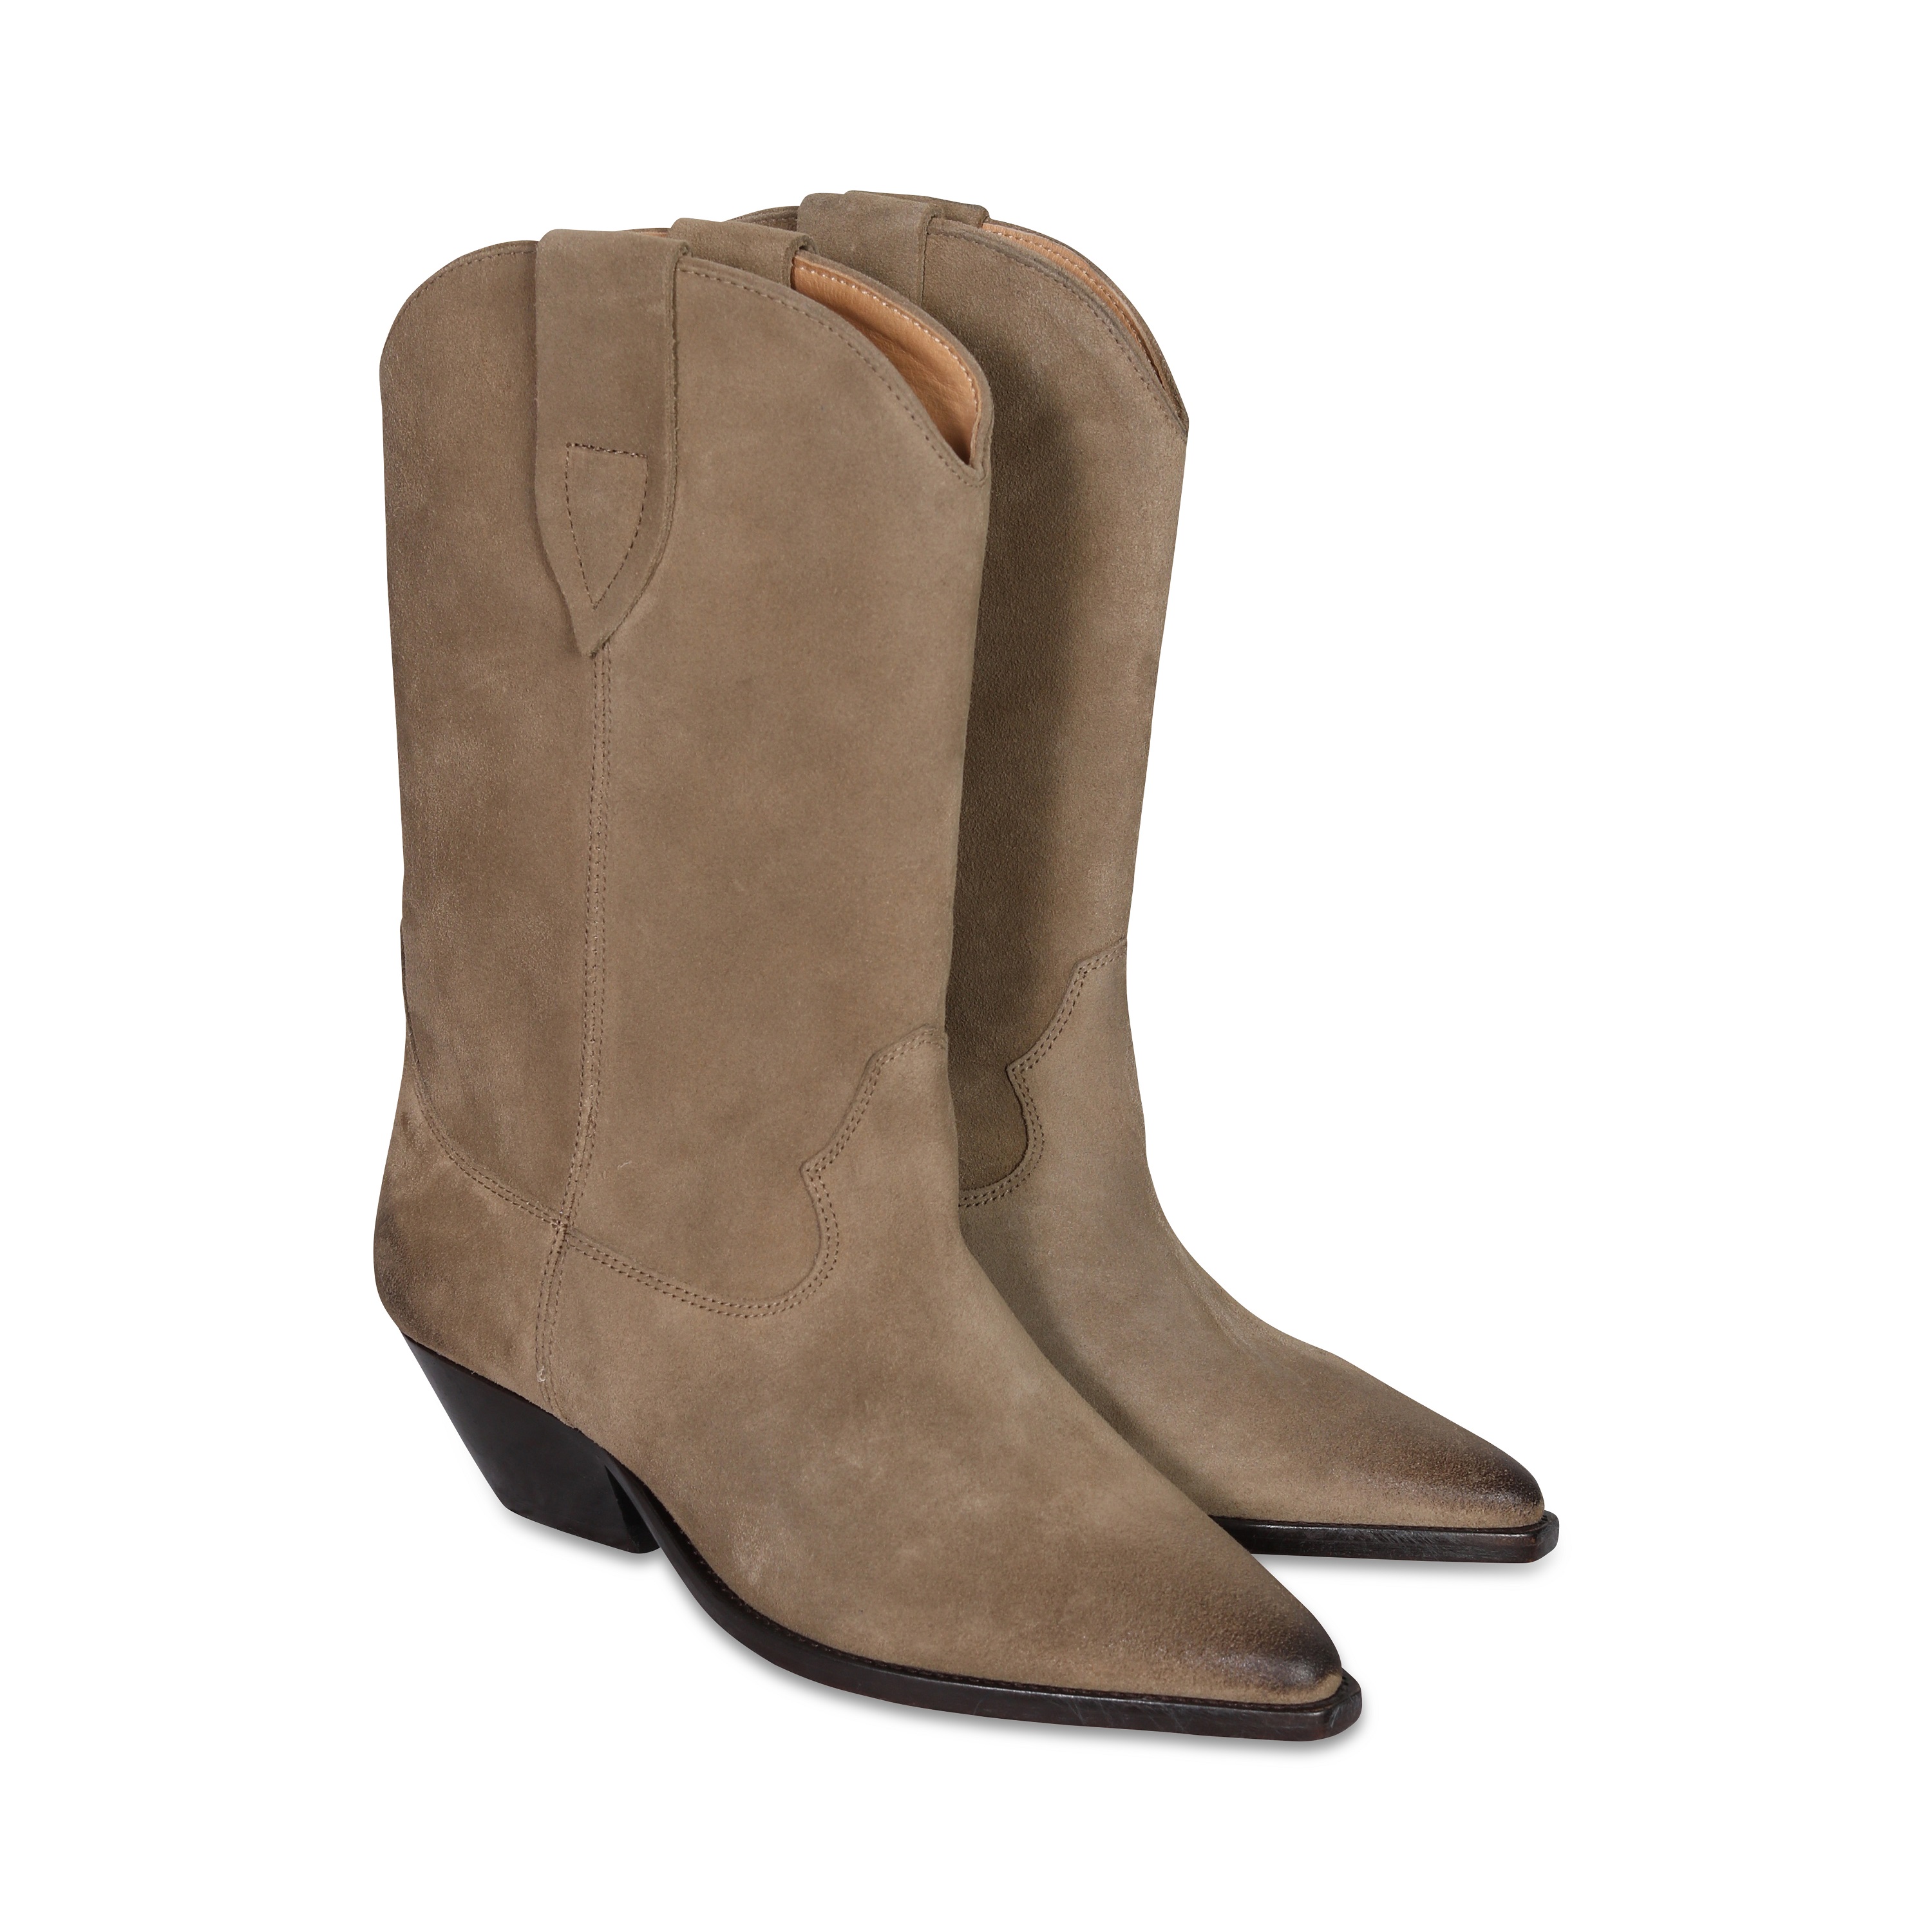 Isabel Marant Duerto Boots in Taupe 38